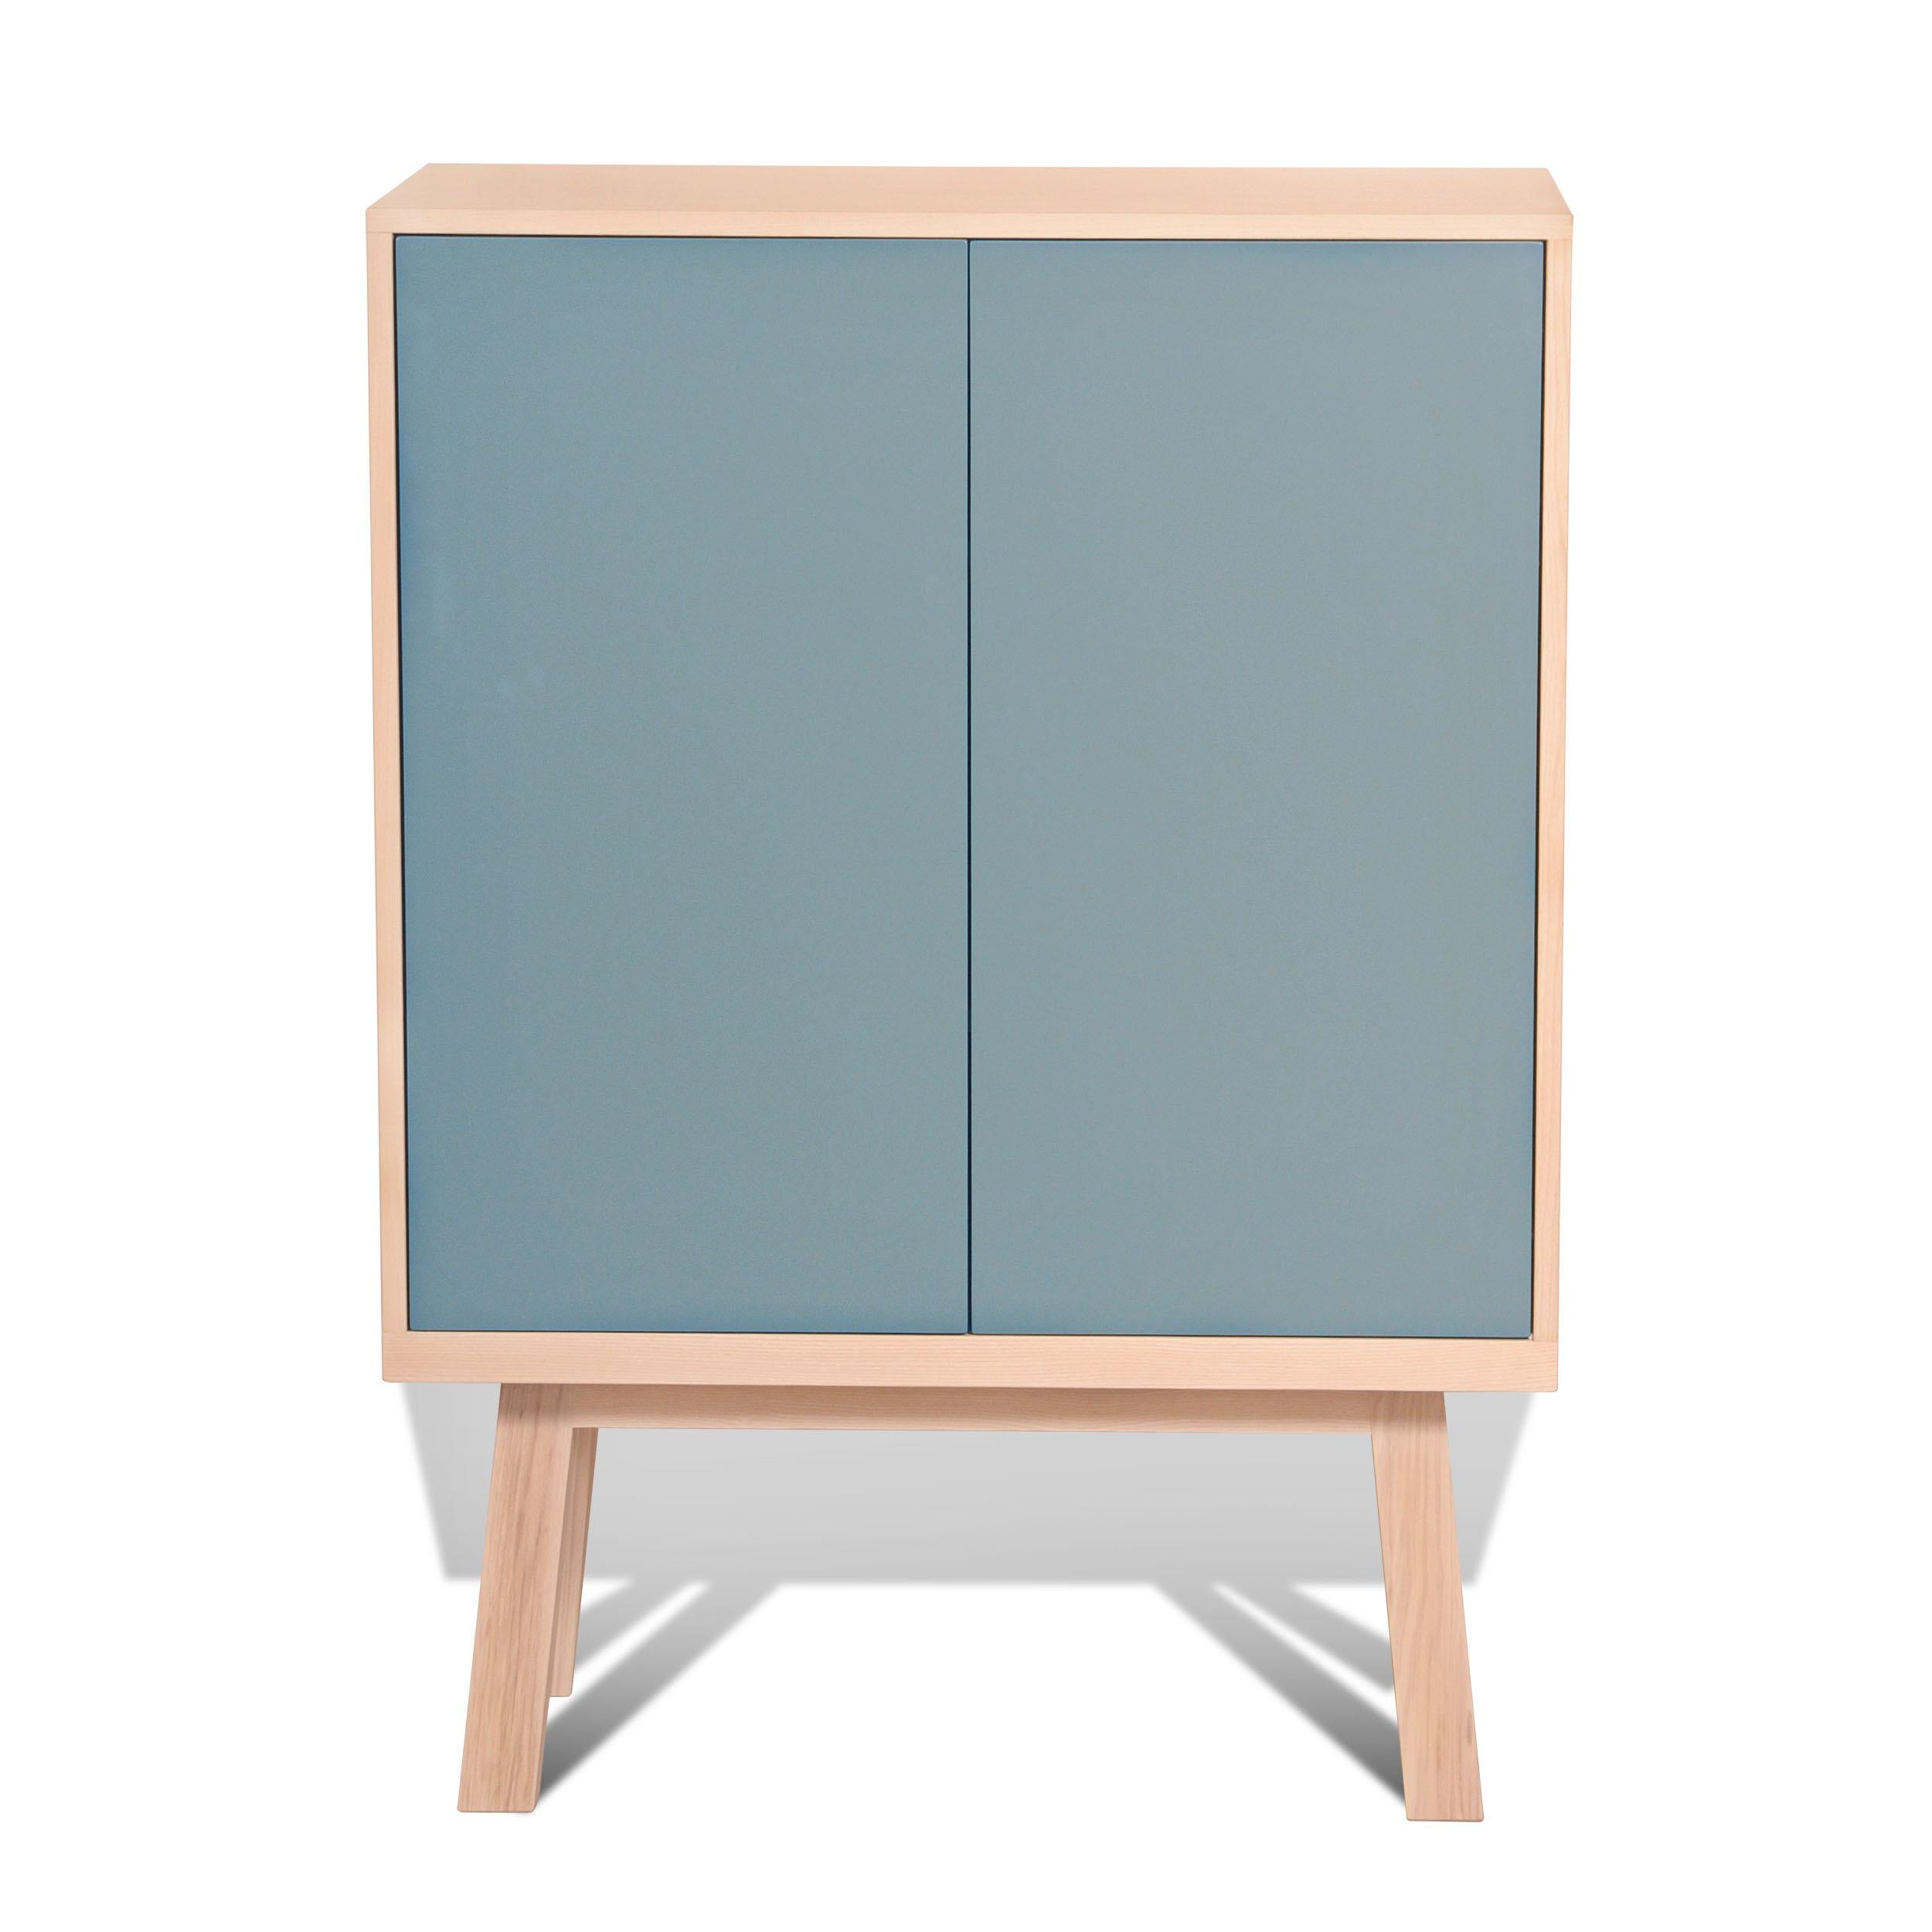 Shelf Cabinet designed by the parisian Designer Eric Gizard is equipped with 2 adjustable lacquered shelves and 2 doors with a push loose opening. 

The Kube itself (without the feet height) is width 90 cm / 35.4'' x height 90 cm / 35.4'' x depth